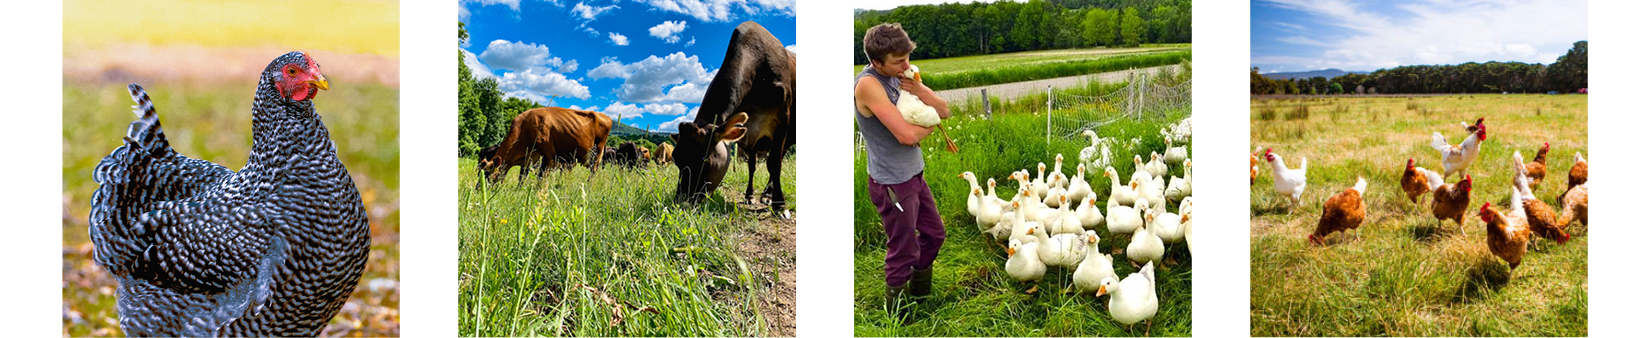 Four pictures. From left to right: a close up of a black and white speckled chicken, a few cows graze in a pasture, a farmer holds a duck, and chickens roam a field.